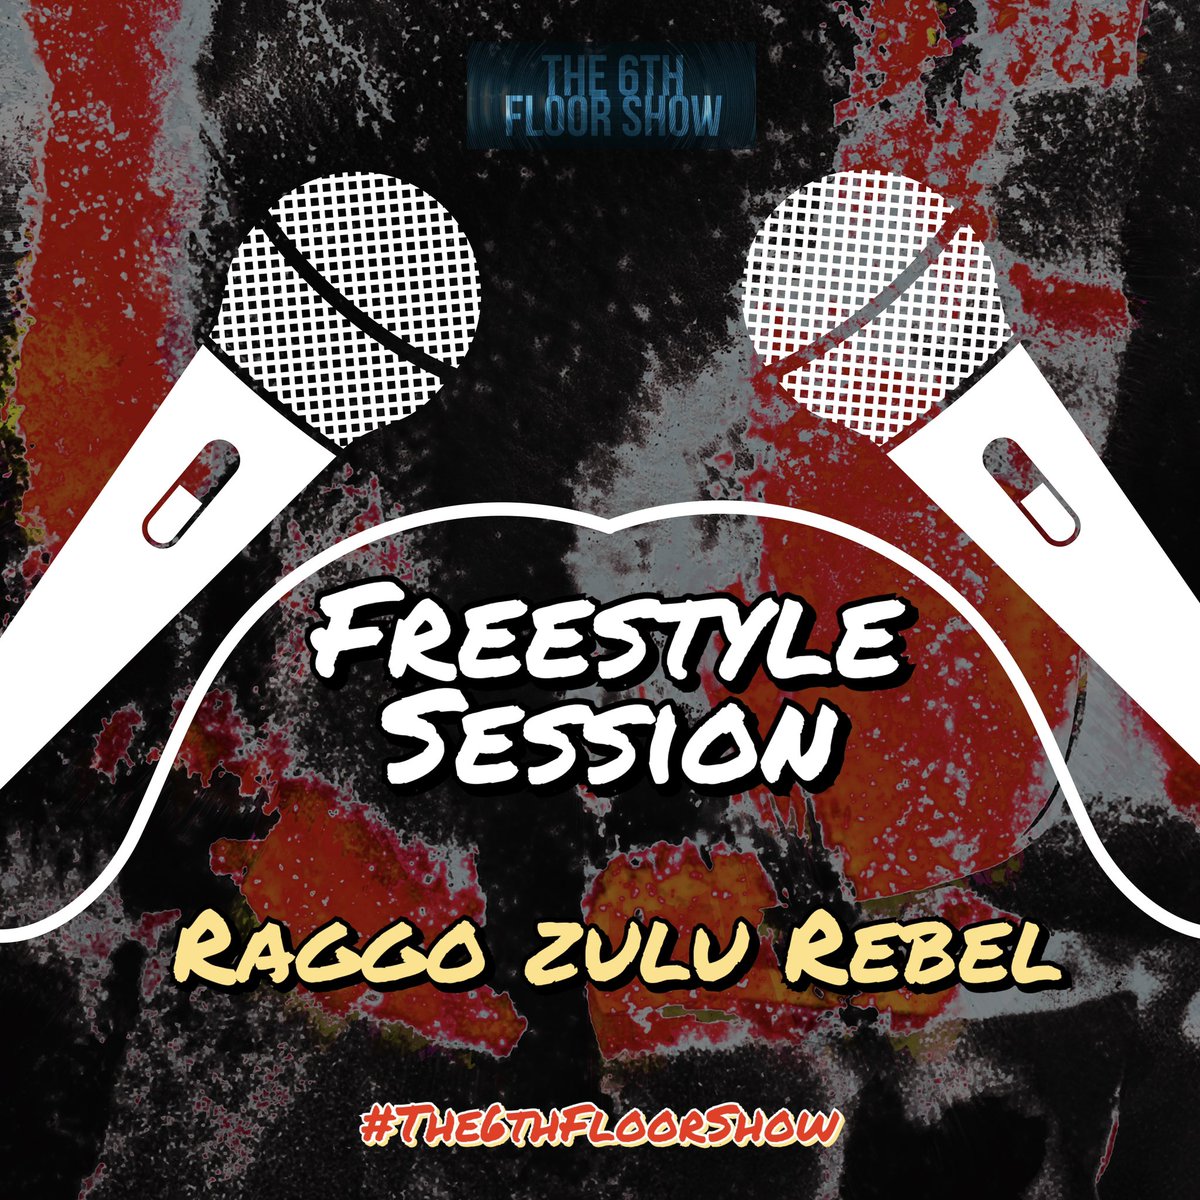 This week’s #FreestyleSession is from…

@raggozulurebel 

🎶 youtu.be/3ypOmOixgxw?si…

#The6thFloorShow